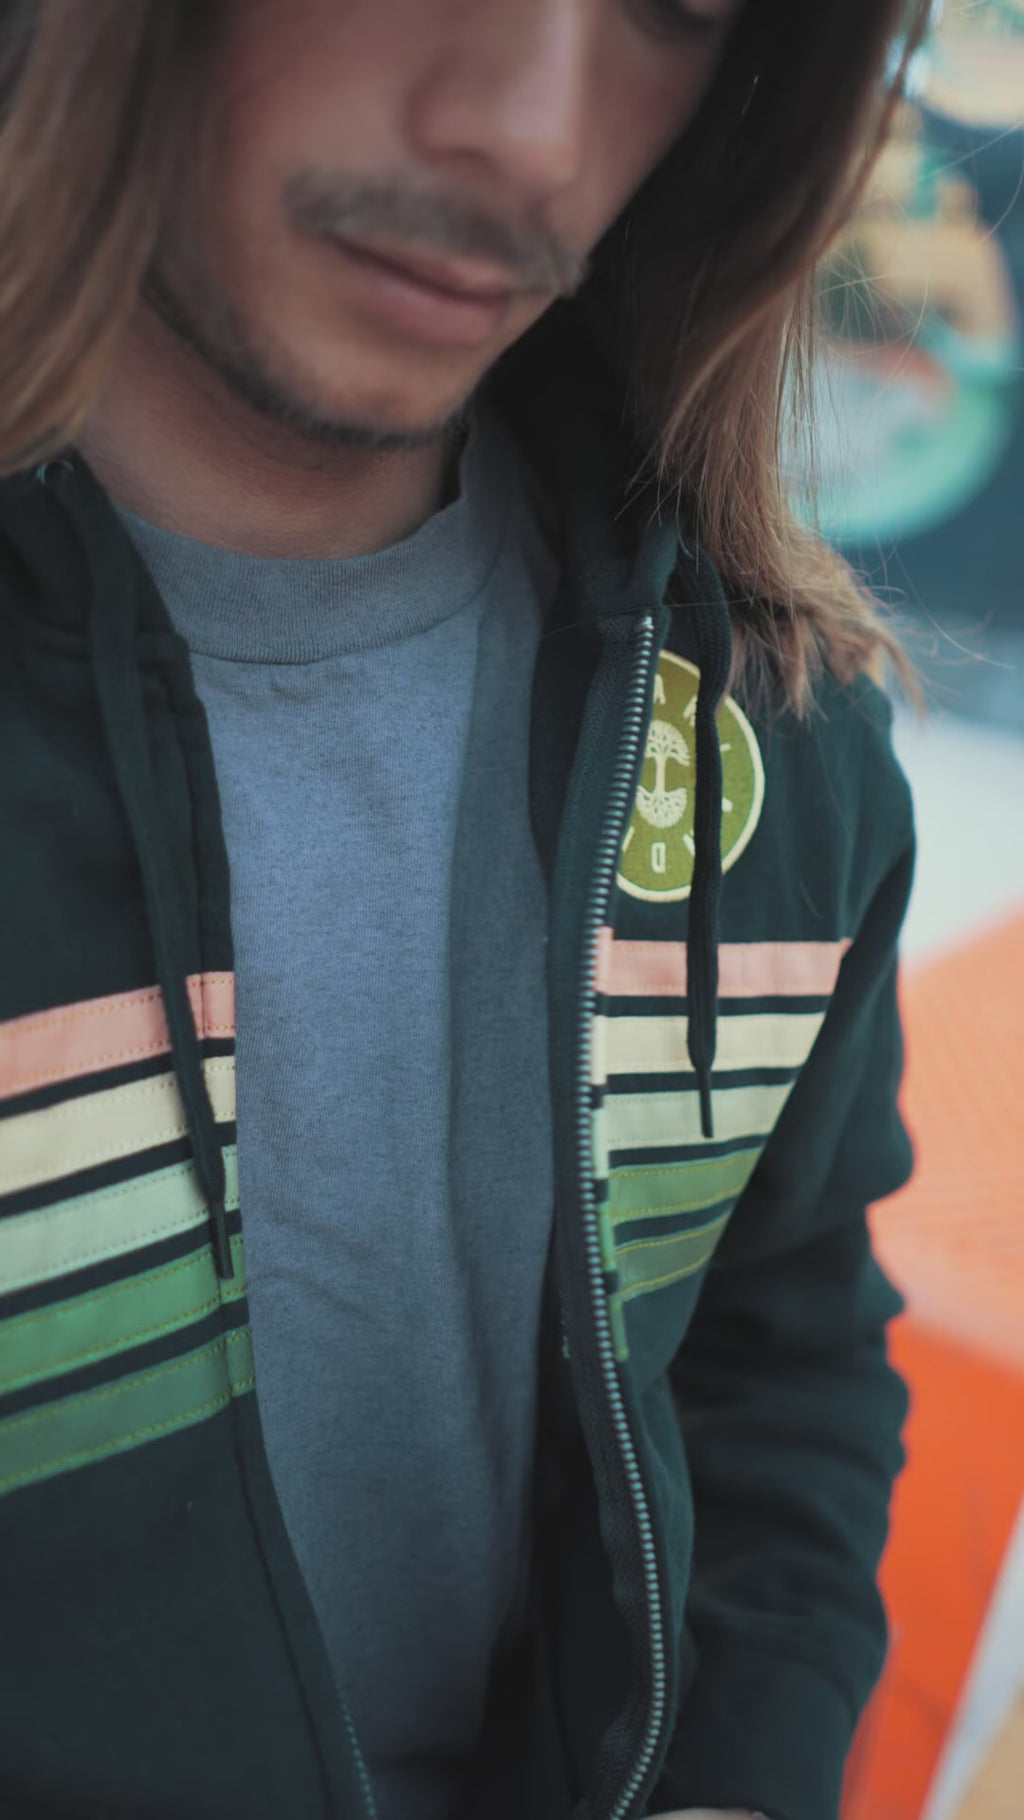 Male model with long hair in Downtown Oakland wearing black zip hoodie with stripes that he zips up and down, smiling looking away.